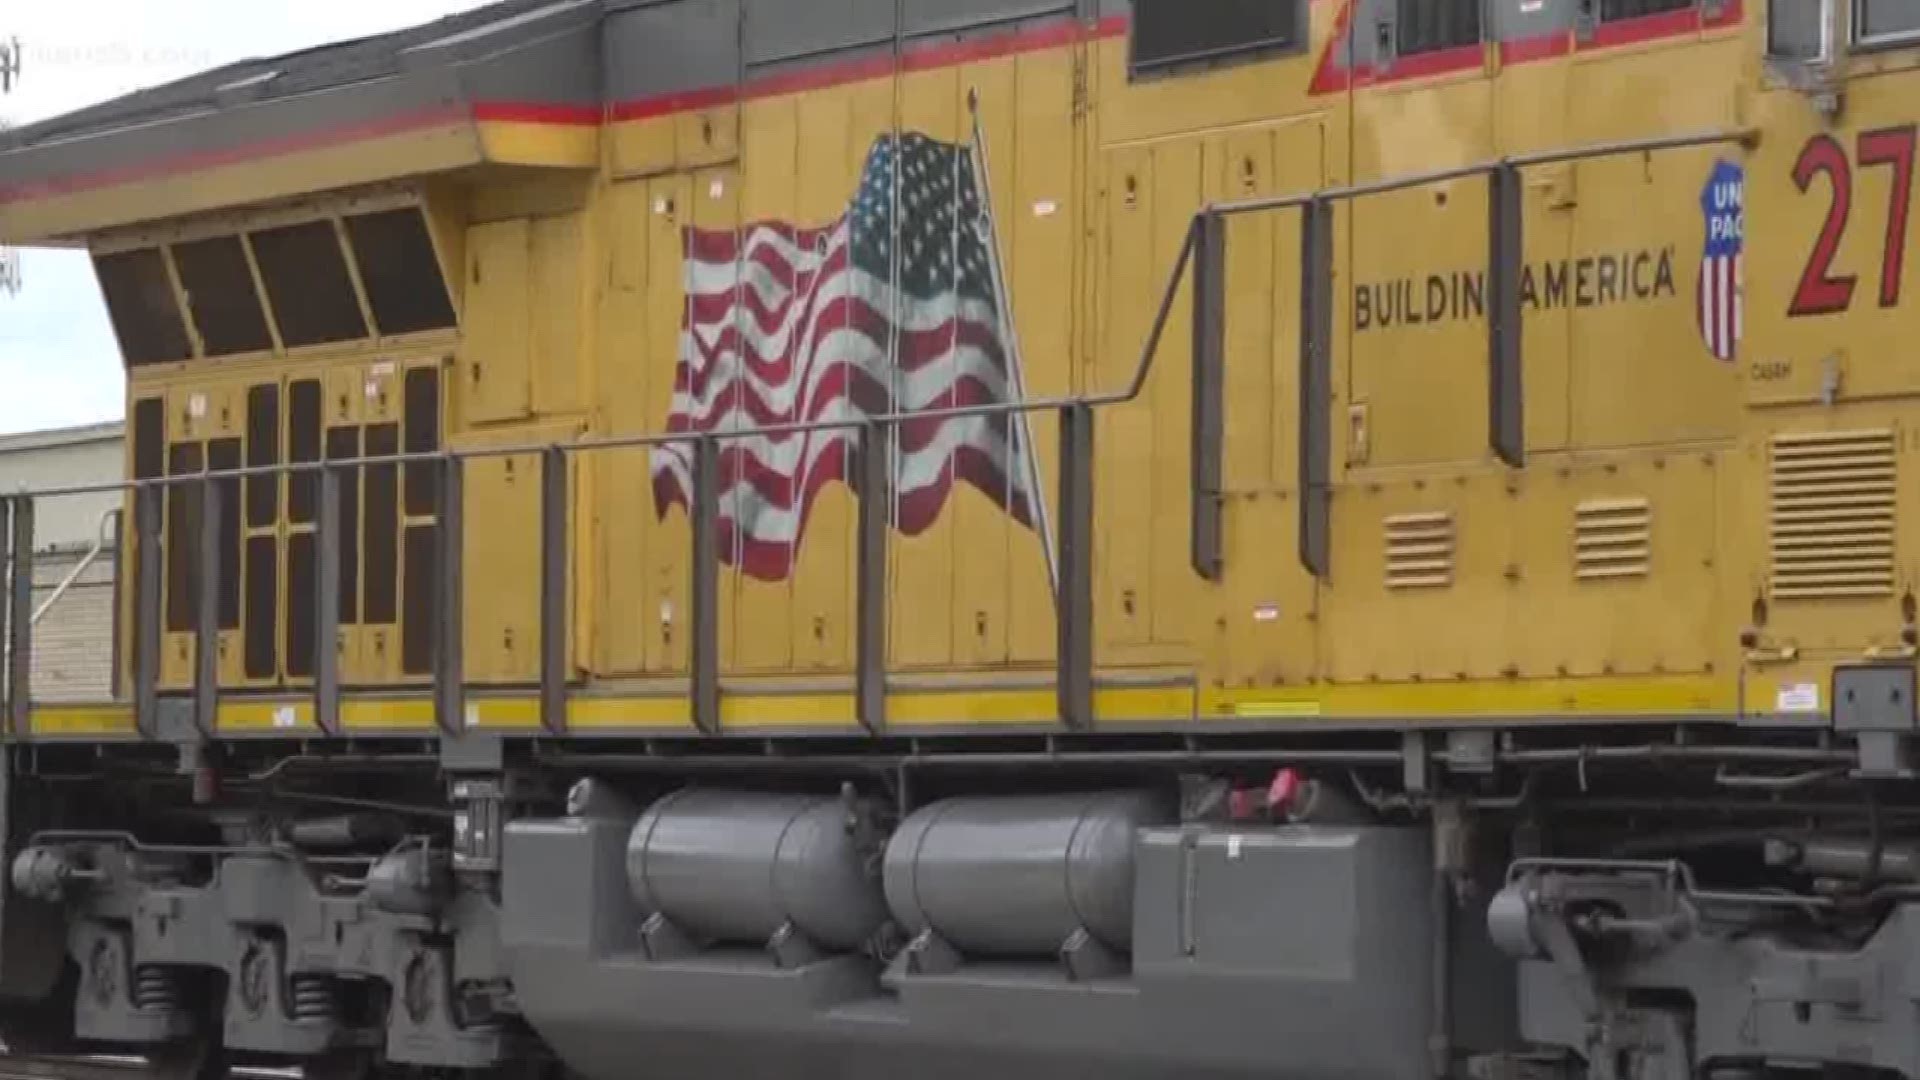 Union Pacific, one of the largest railroad companies in the U.S., unveiled a commemorative locomotive honoring the military.